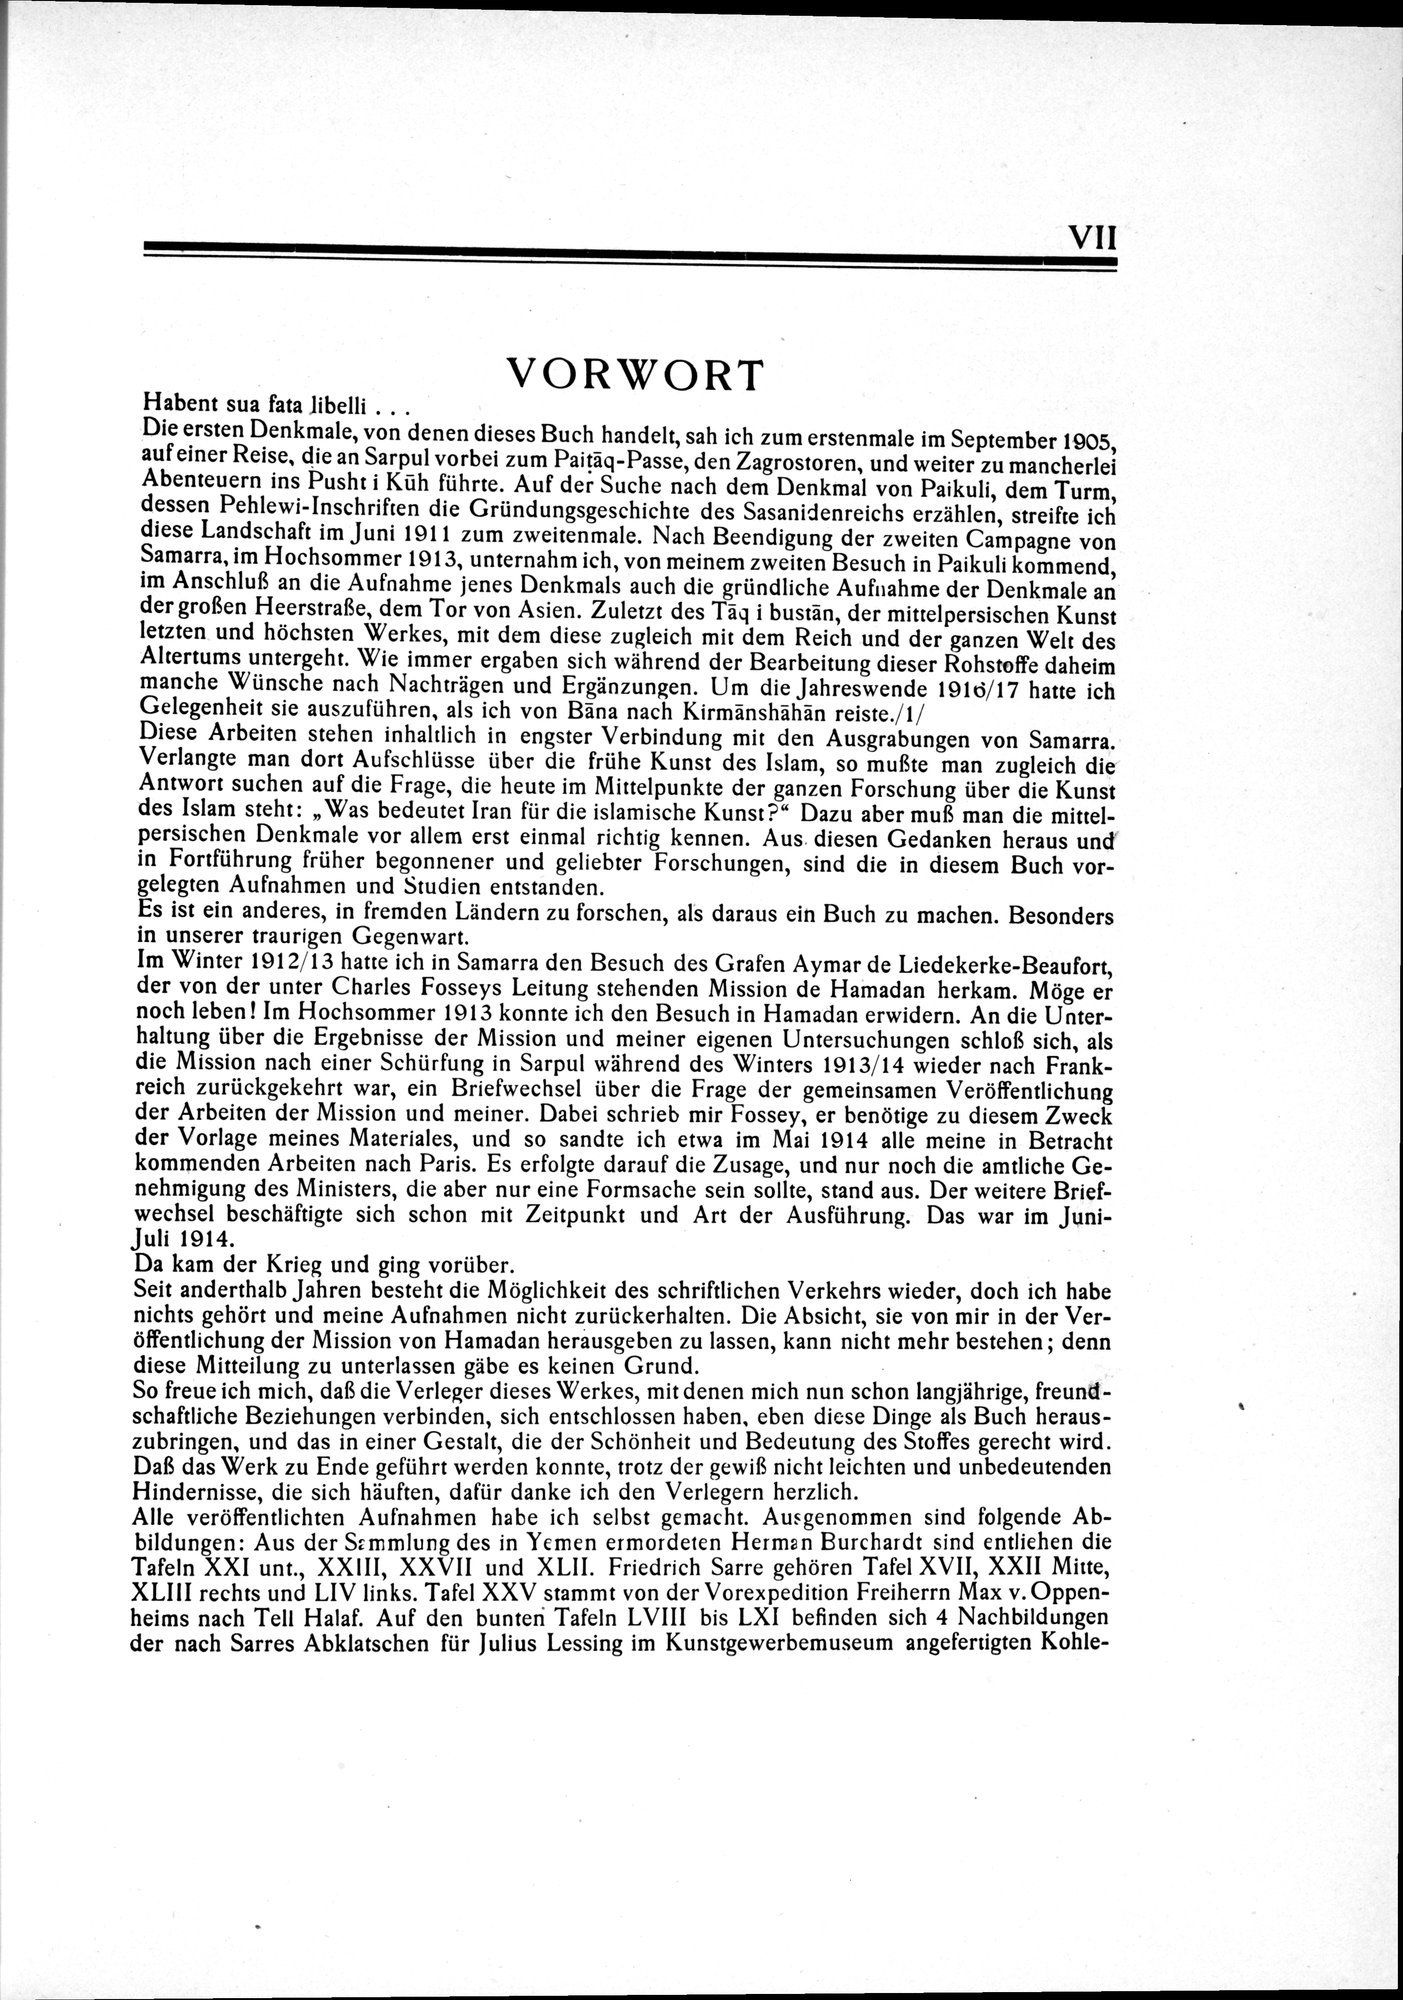 Am Tor von Asien : vol.1 / Page 13 (Grayscale High Resolution Image)